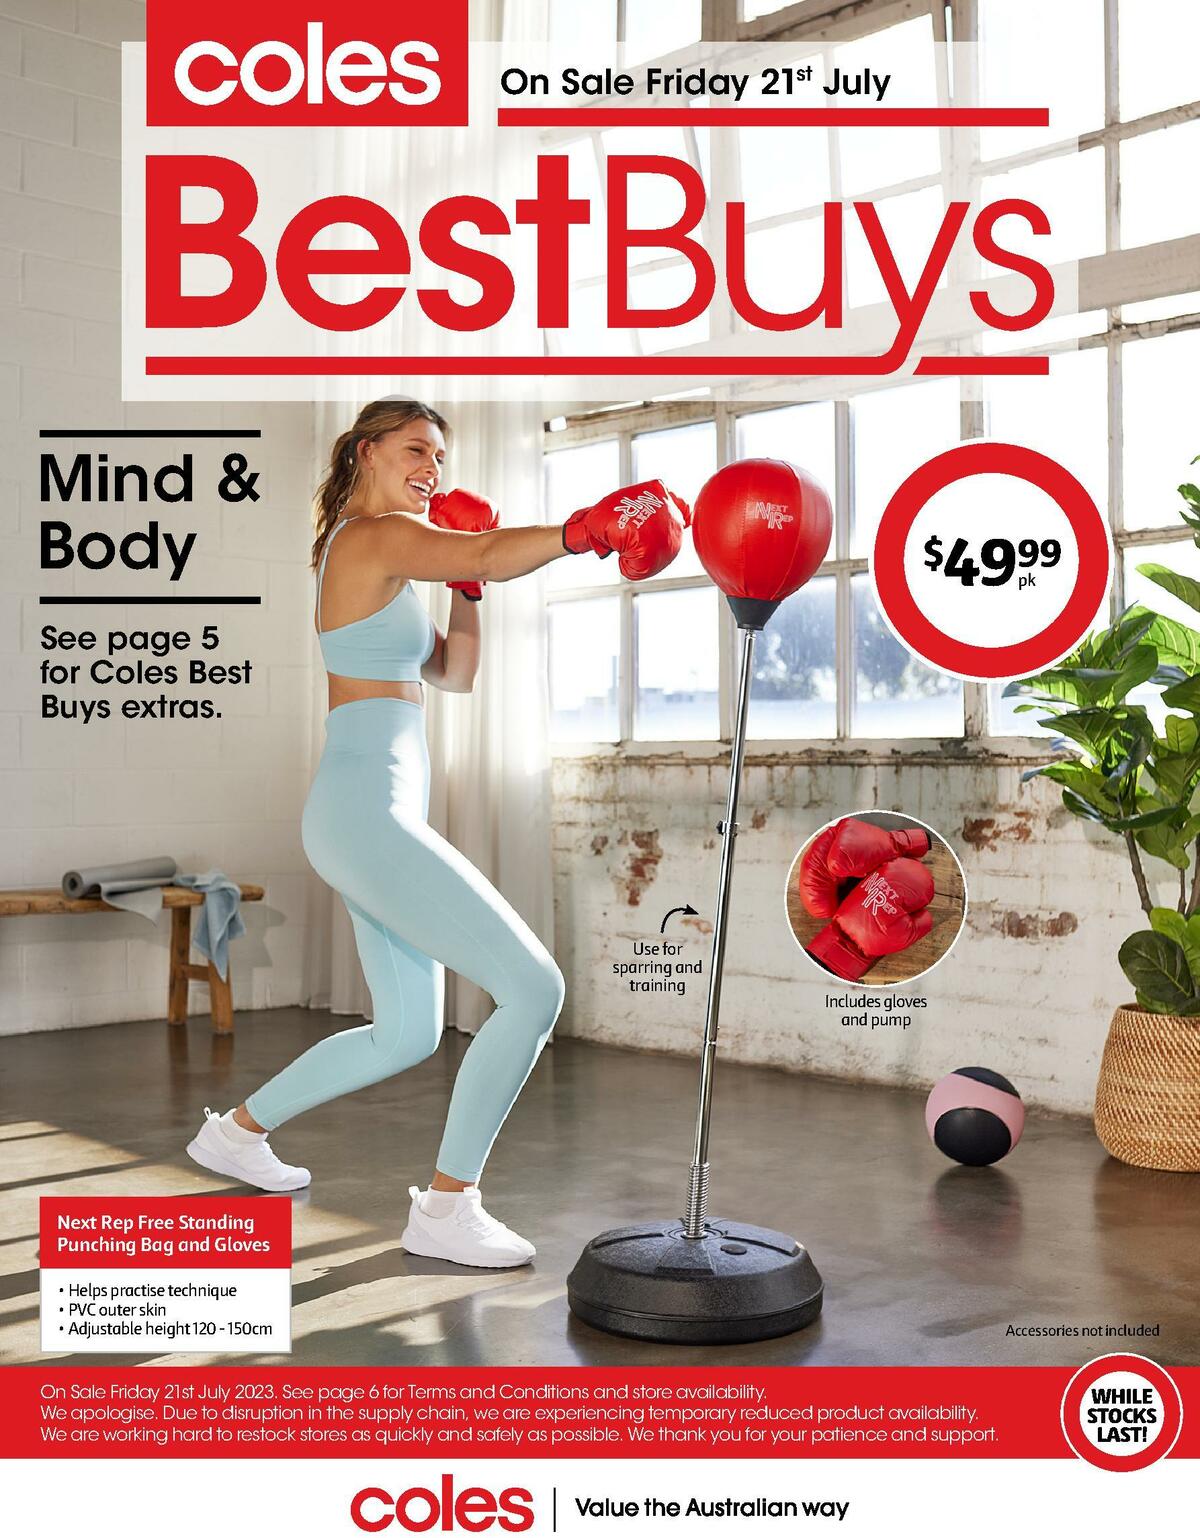 Coles Best Buys - Mind & Body Catalogues from 21 July